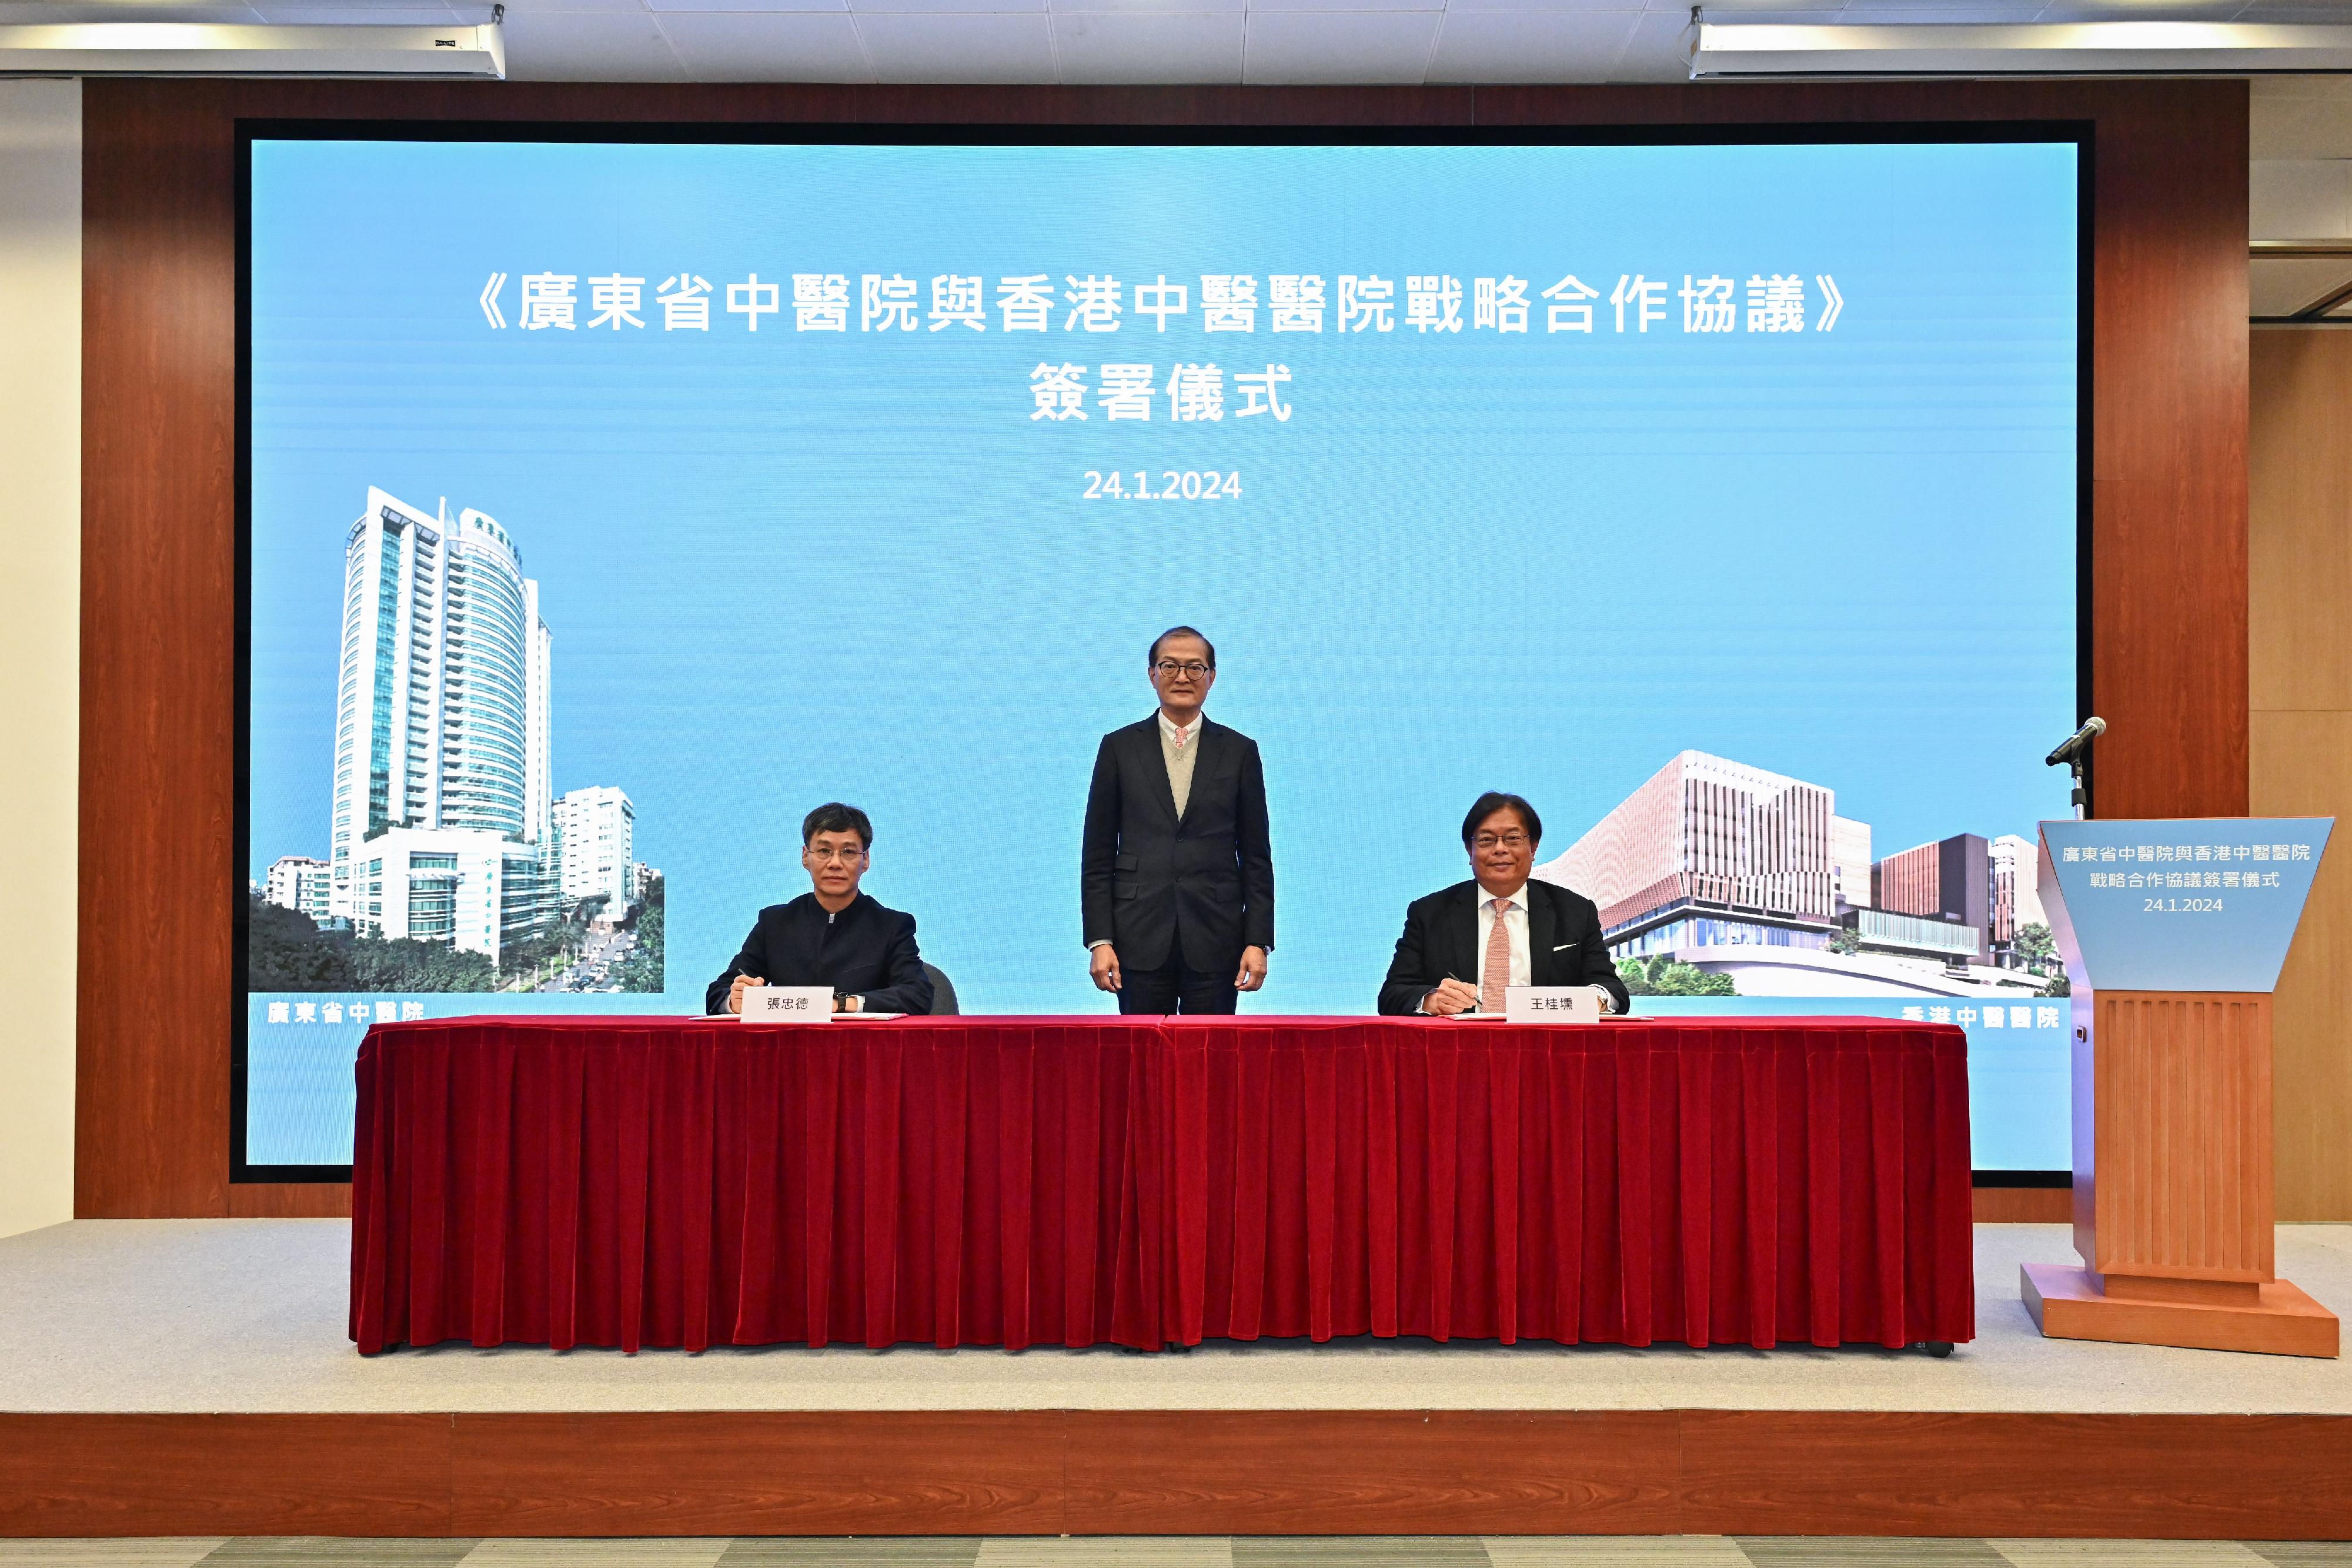 The Secretary for Health, Professor Lo Chung-mau (centre), witnesses the signing of the Strategic Collaboration Agreement between Guangdong Provincial Hospital of Traditional Chinese Medicine and Chinese Medicine Hospital of Hong Kong by the President of the Guangdong Provincial Hospital of Traditional Chinese Medicine, Professor Zhang Zhongde (left), and the Chairman of the Board of Directors of the Chinese Medicine Hospital of Hong Kong, Mr Huen Wong (right), today (January 24). The Agreement establishes a close partnership between the two hospitals and helps promote further development of Chinese medicine in Hong Kong.
